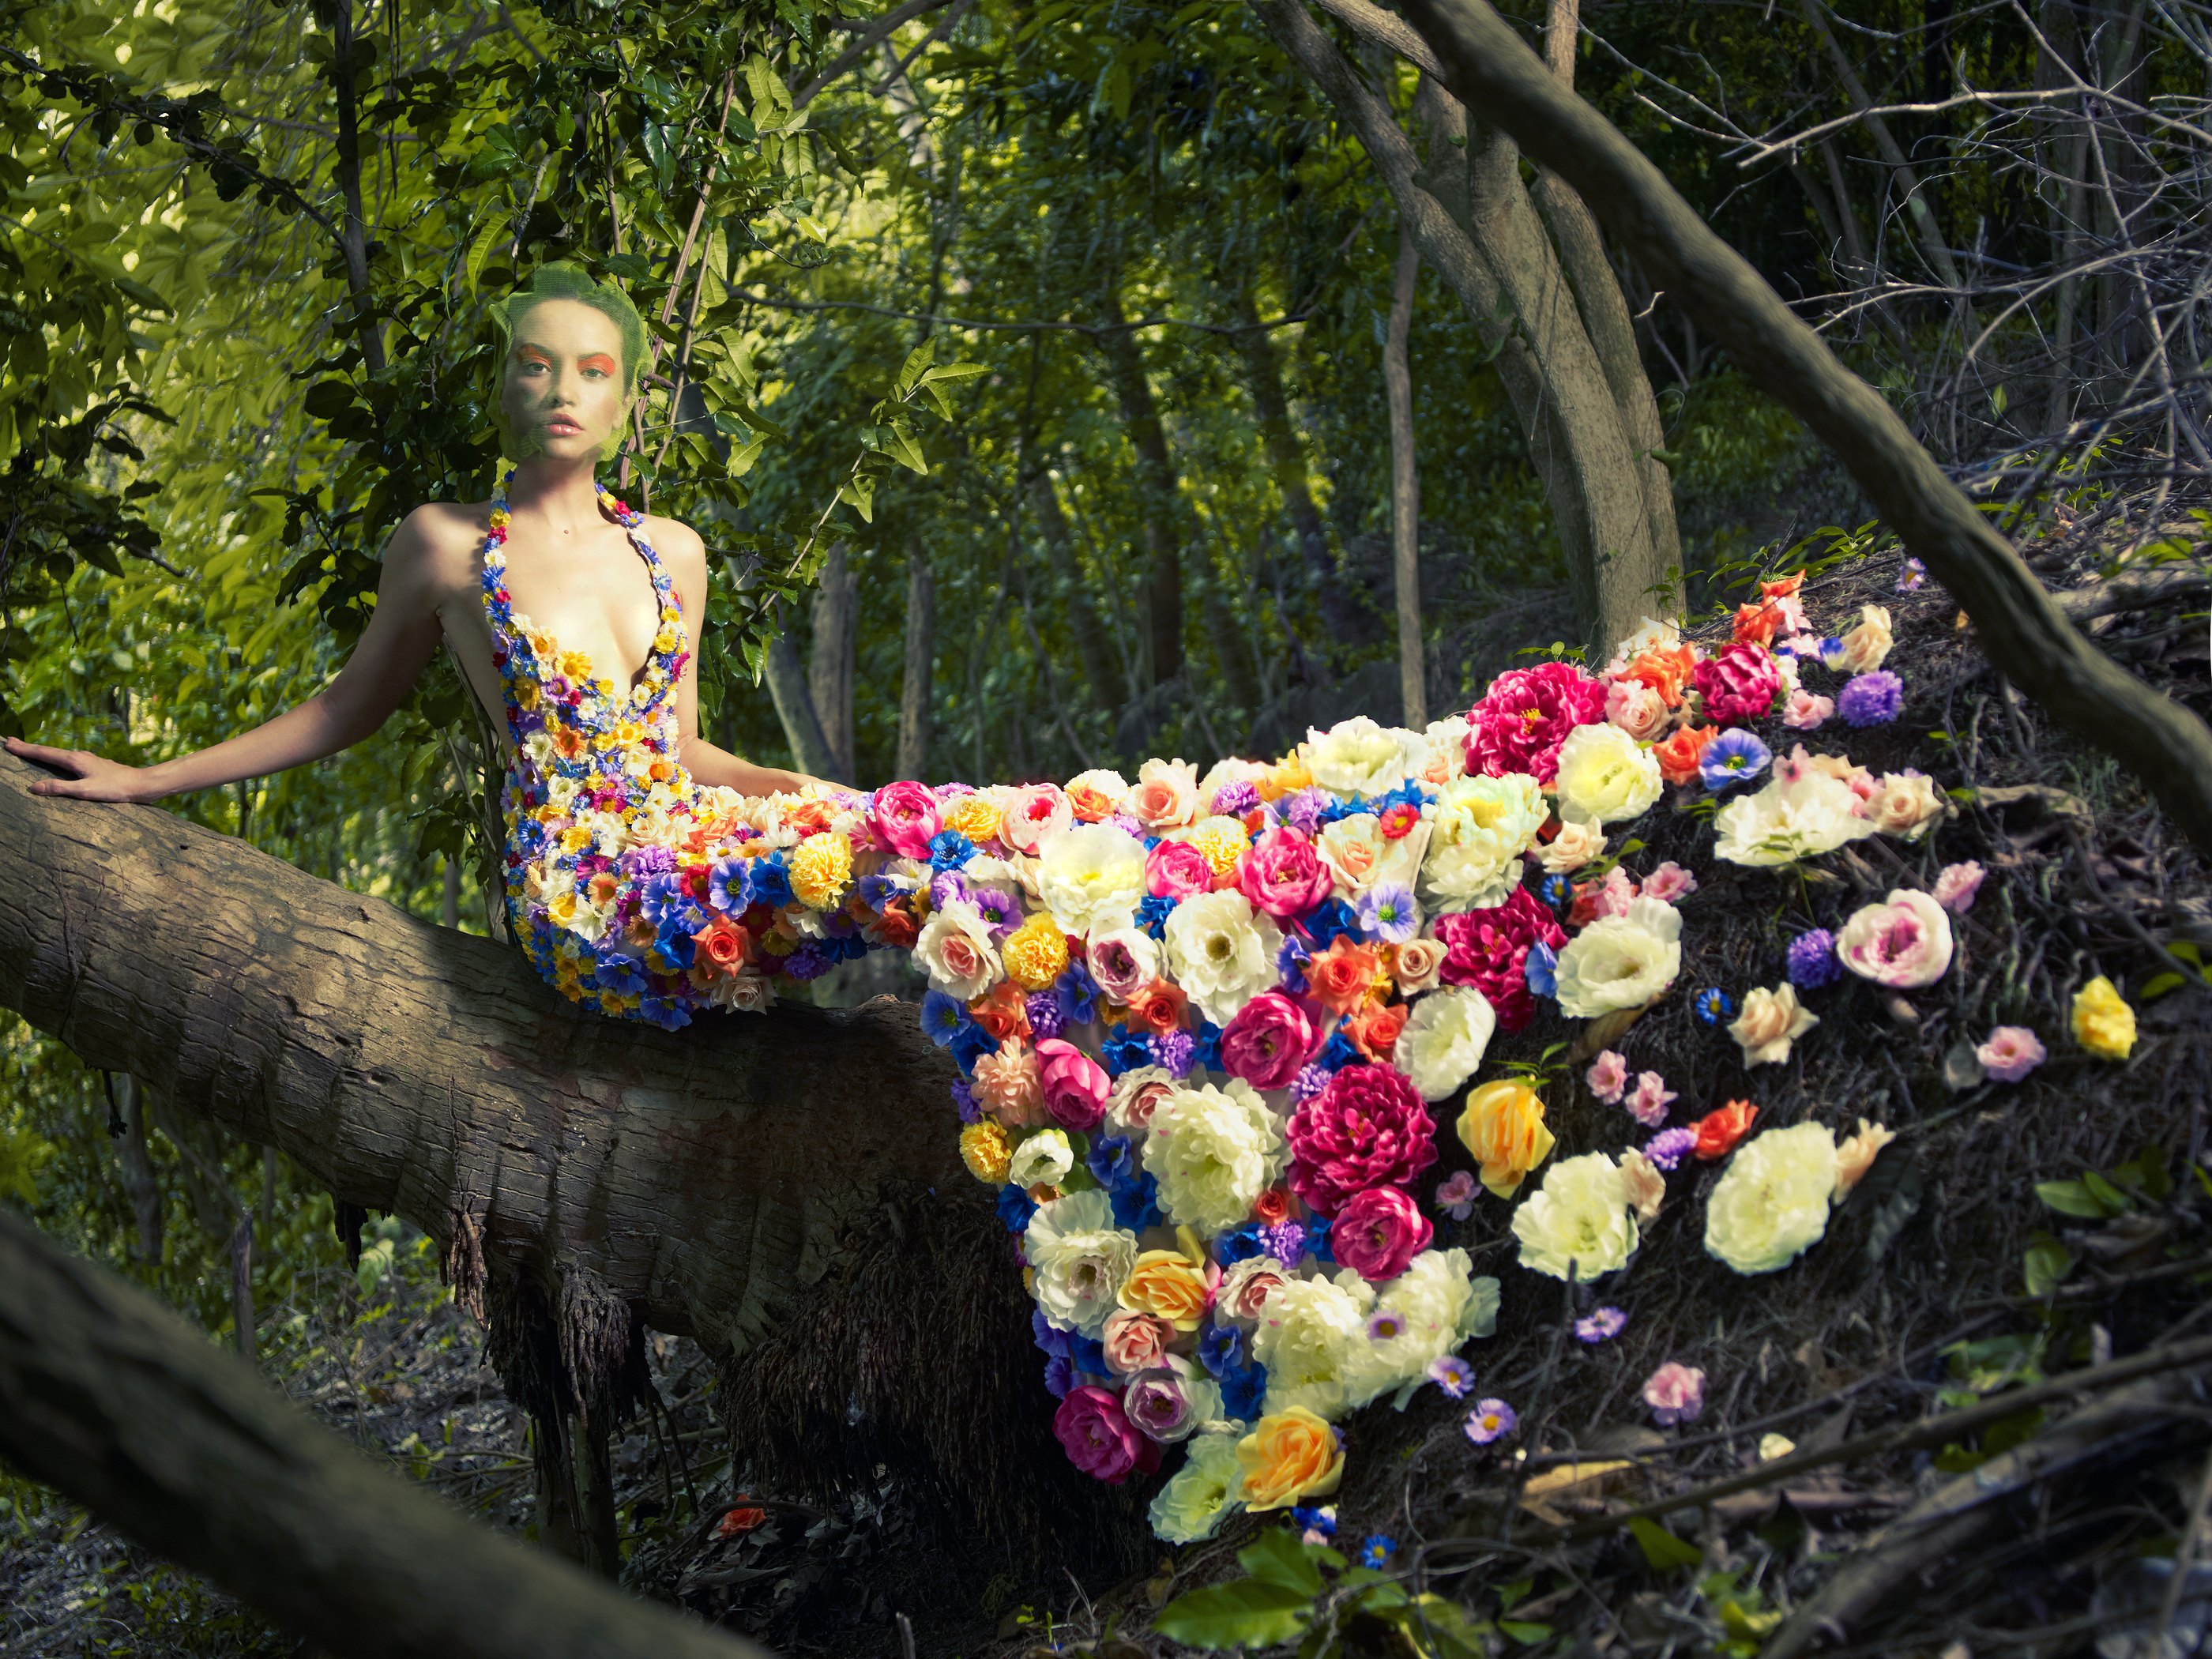 Blooming gorgeous lady in a dress of flowers in the rainforest